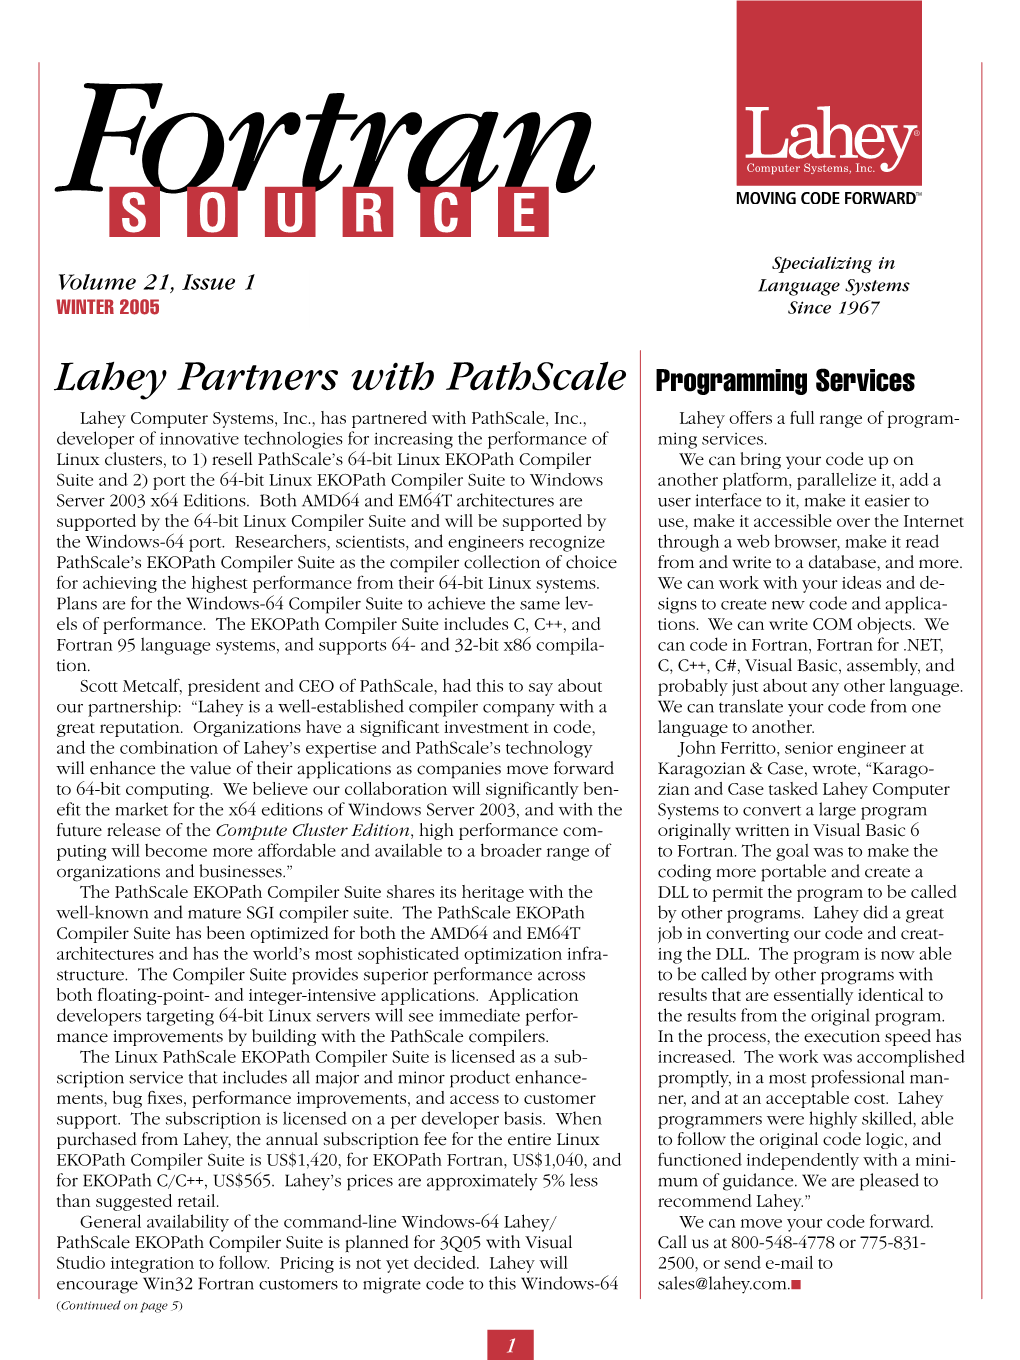 Lahey Partners with Pathscale